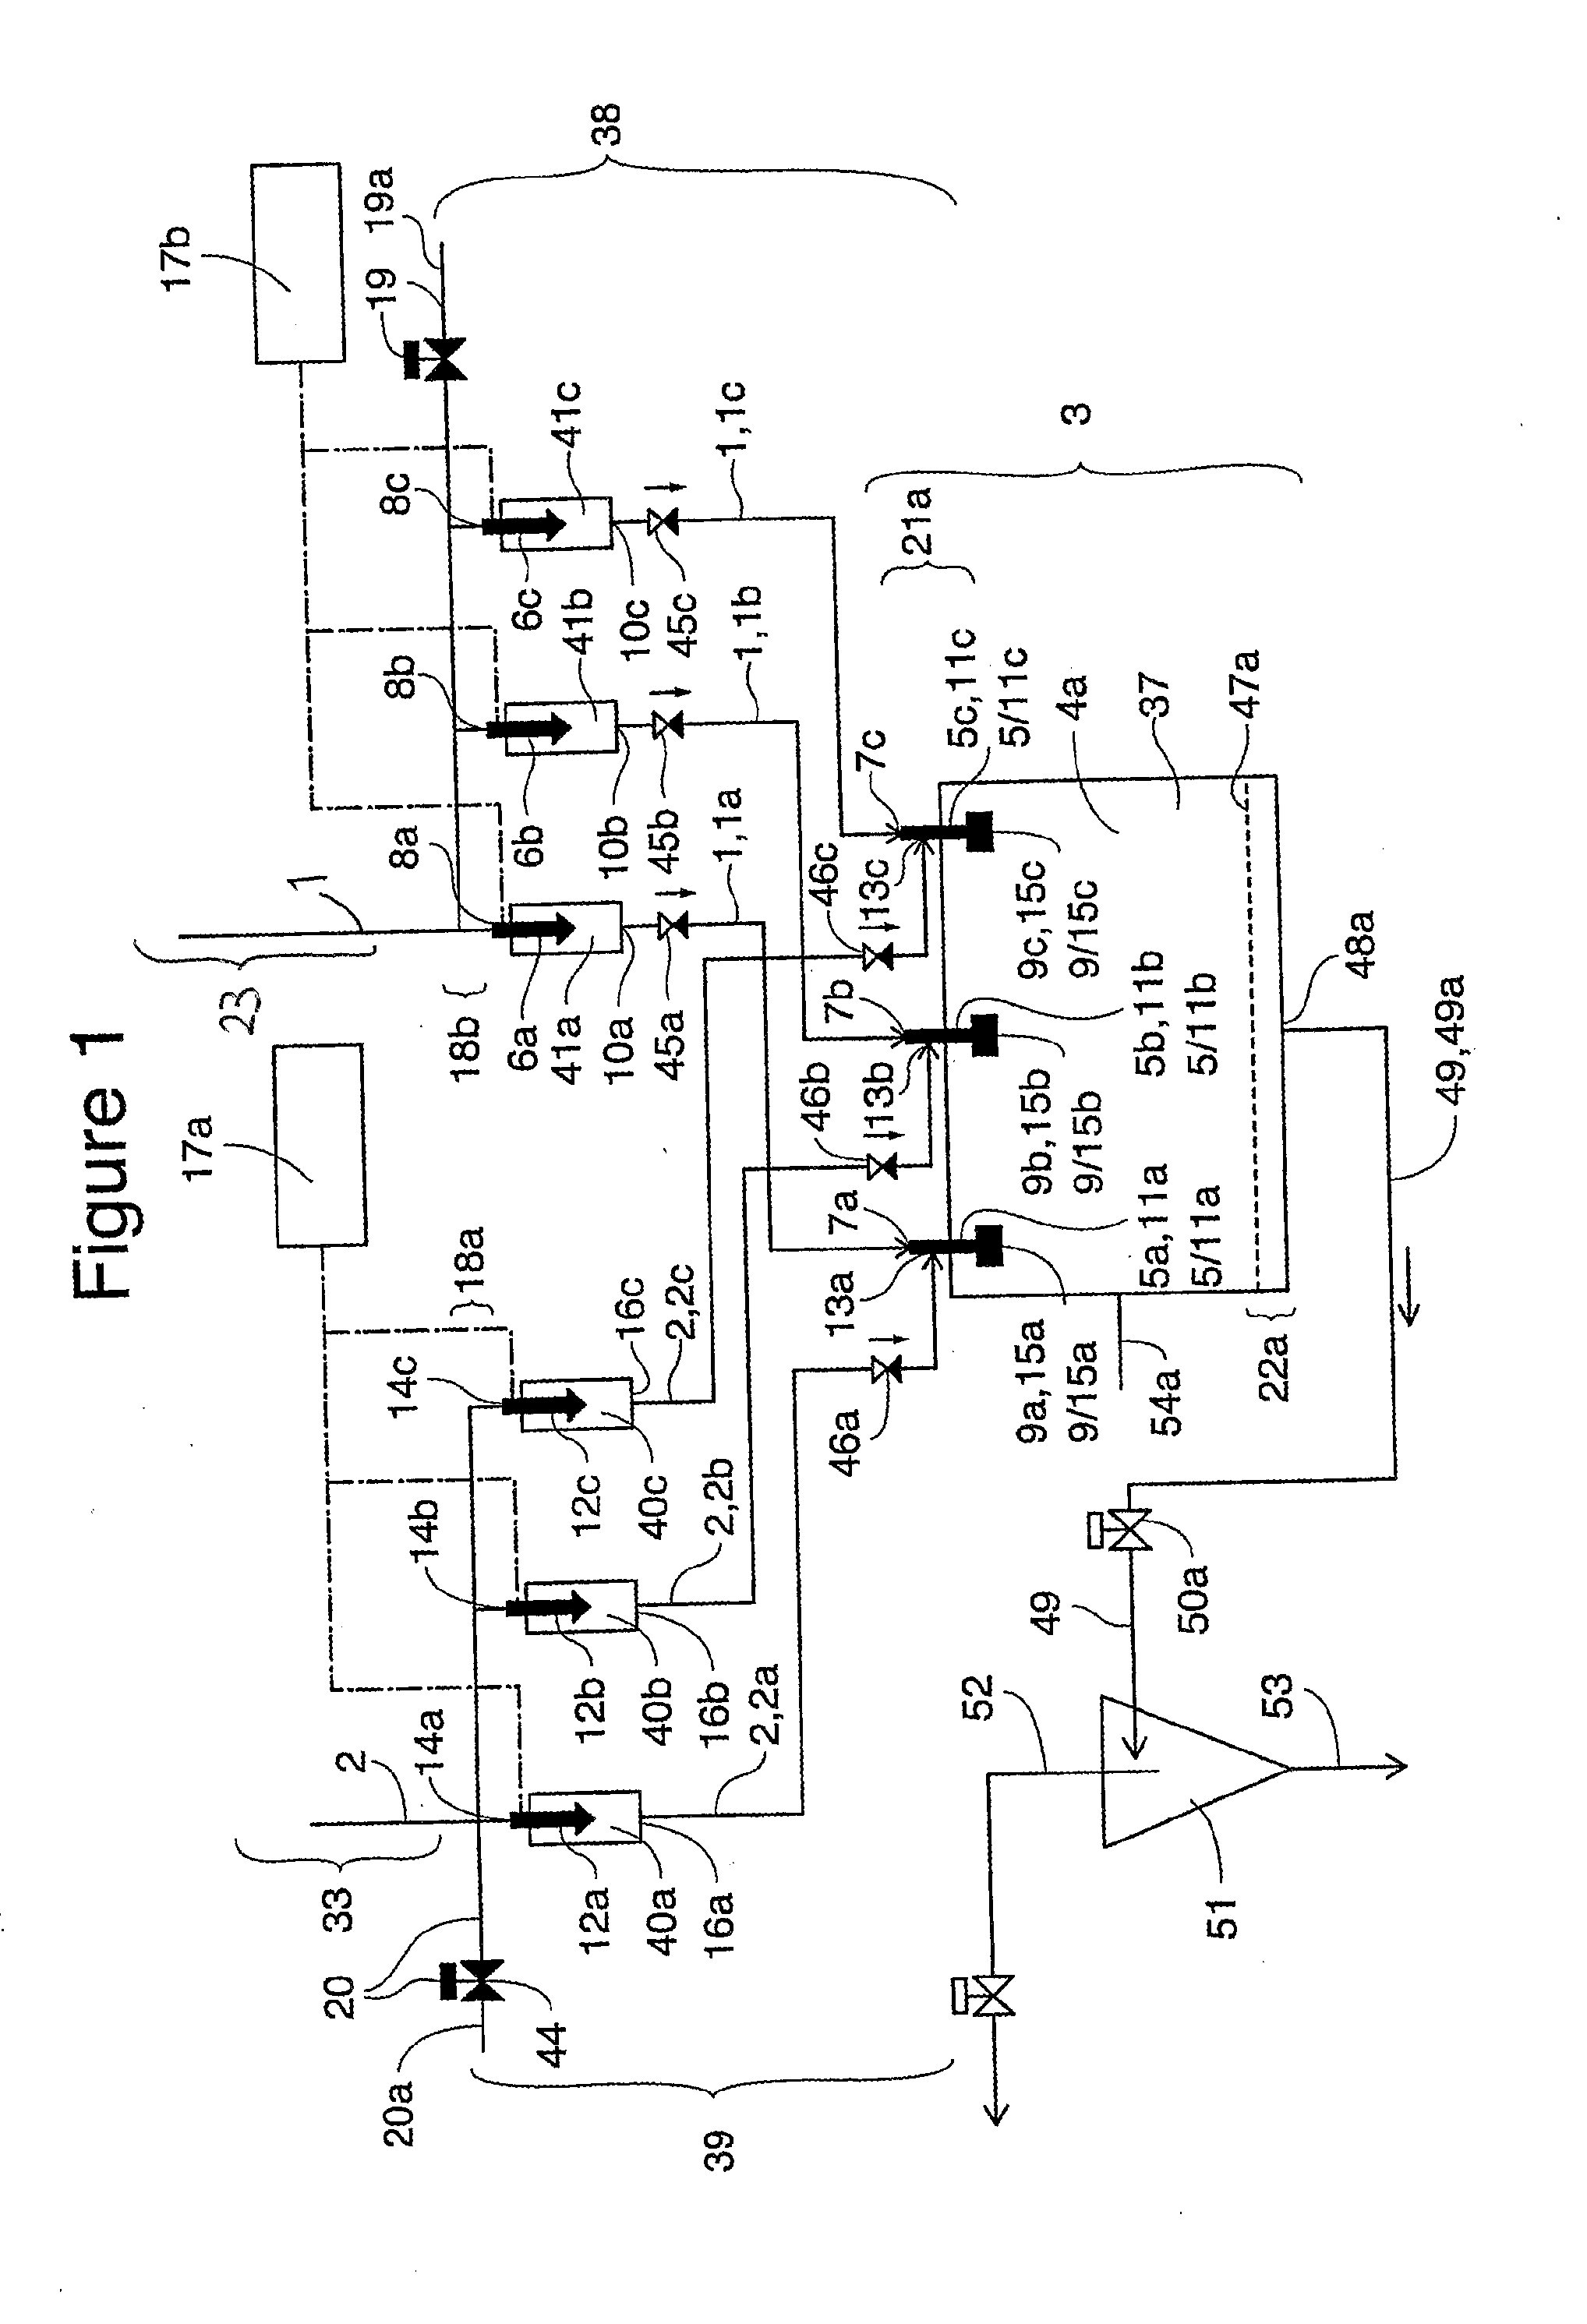 Apparatus and Method for the Production of Particles